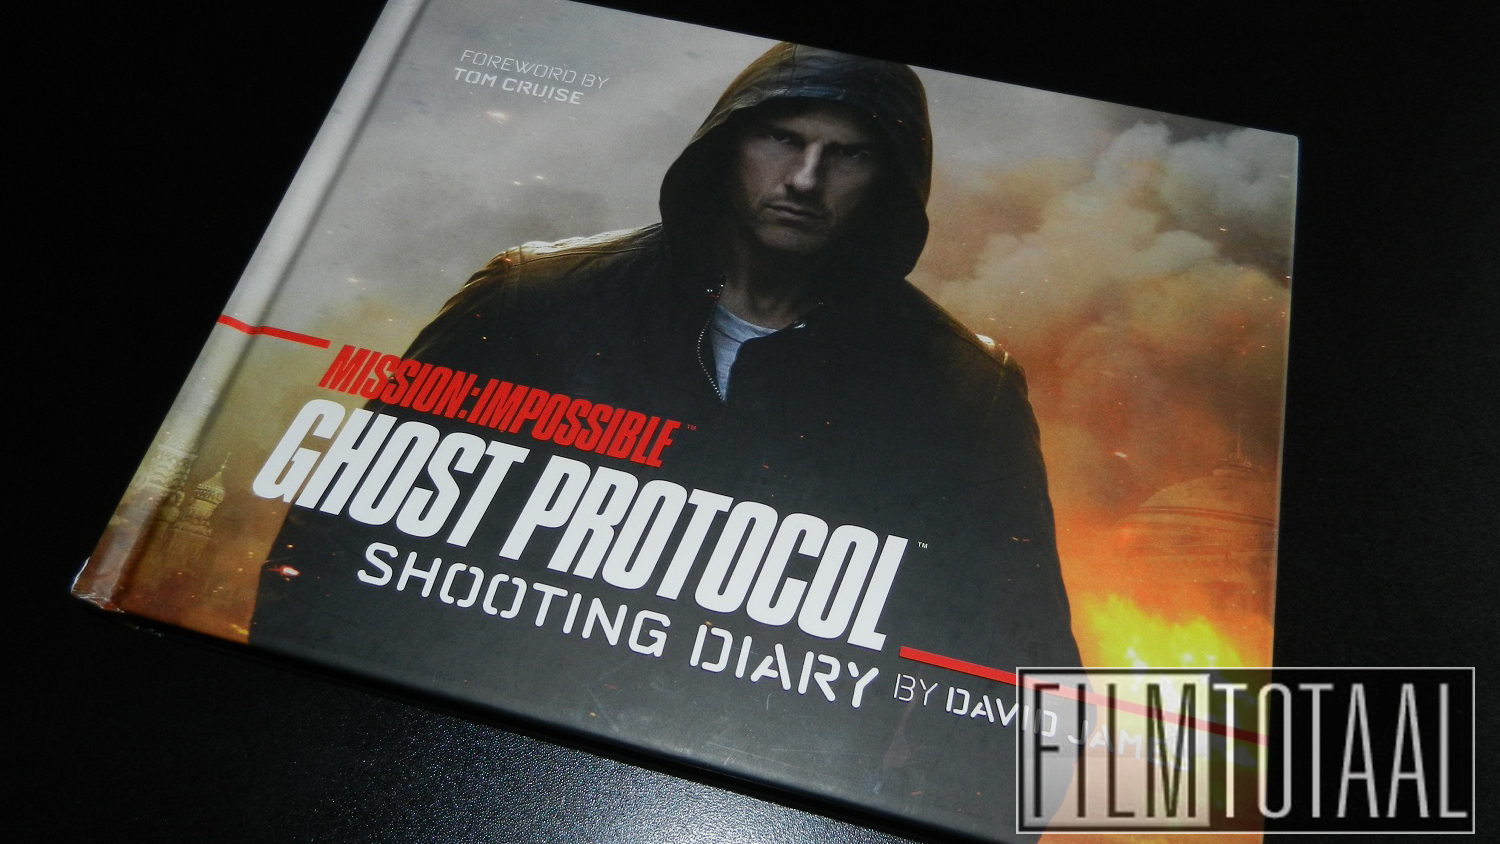 Fraai boek - Mission: Impossible: Ghost Protocol - Shooting Diary